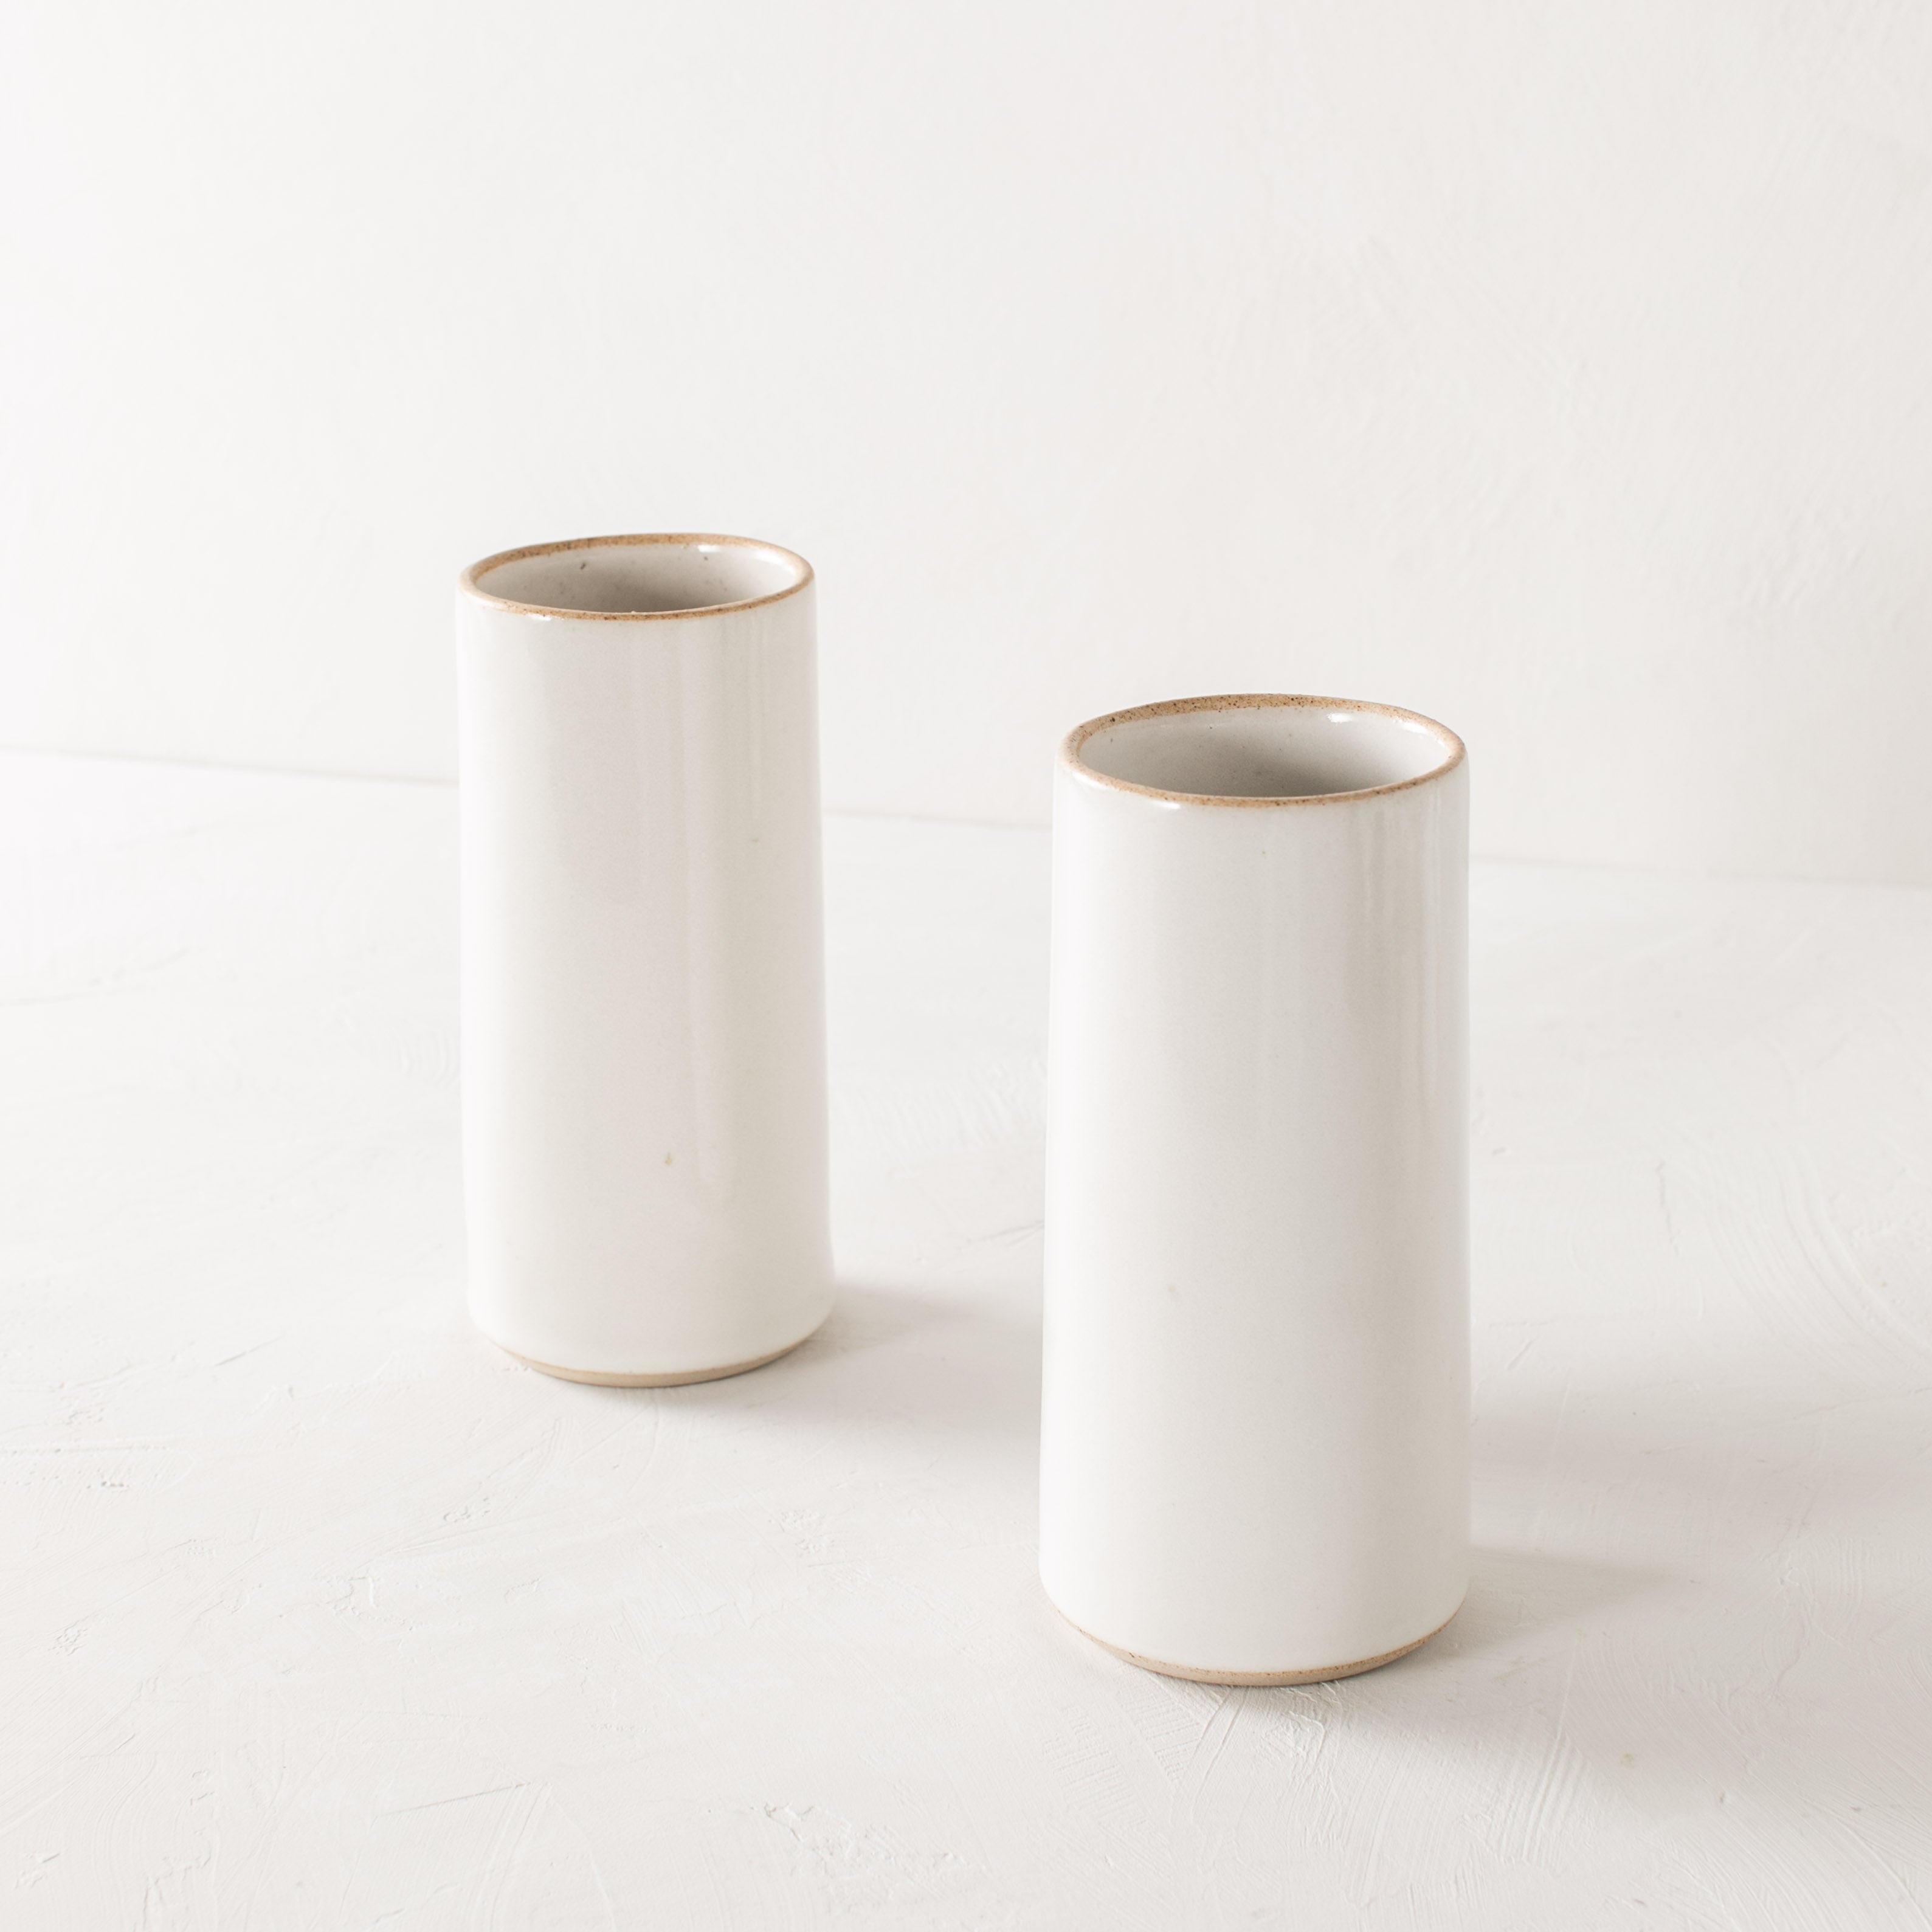 Two tall white glazed ceramic cylinder vases with an exposed stoneware rim and base. Staged on a white textured plaster table and a white plaster textured wall. Designed and sold by Convivial Production, Kansas City Ceramics.